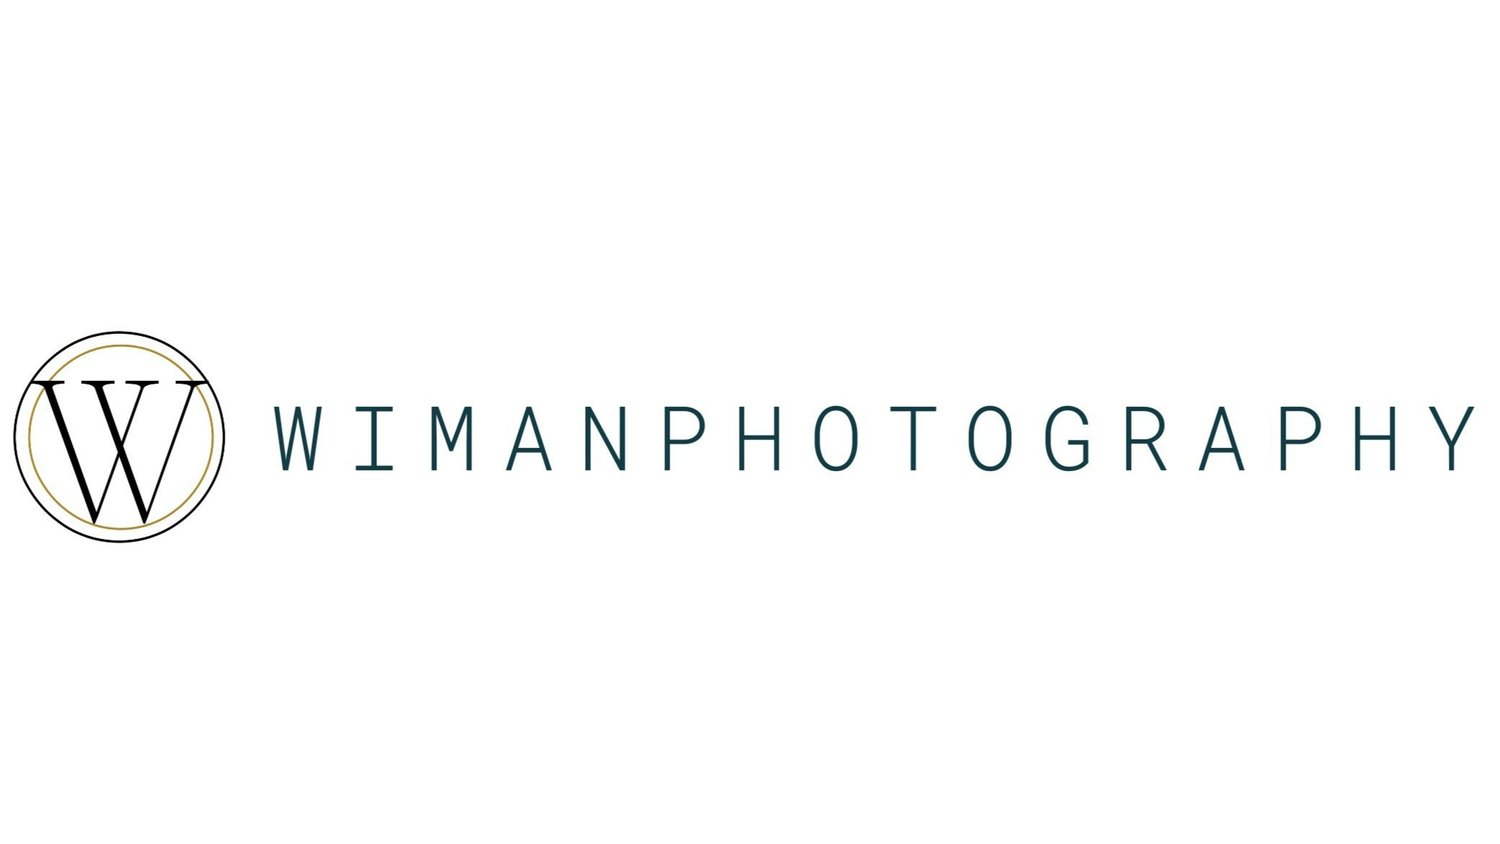 WIMANPHOTOGRAPHY